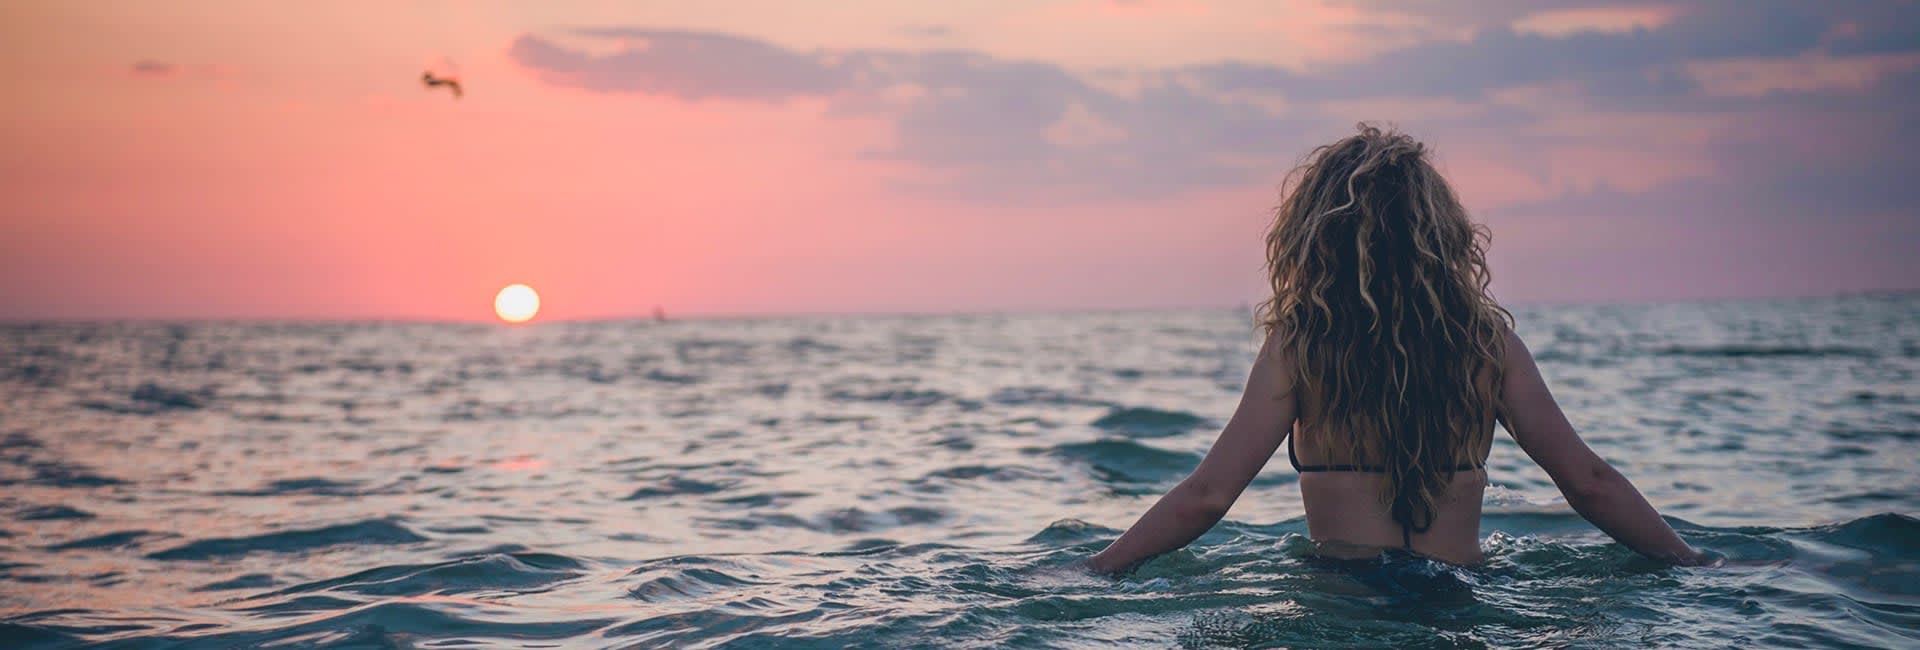 A photo of a woman with long dark-blonde curly hair in the ocean going in the direction to a sunset